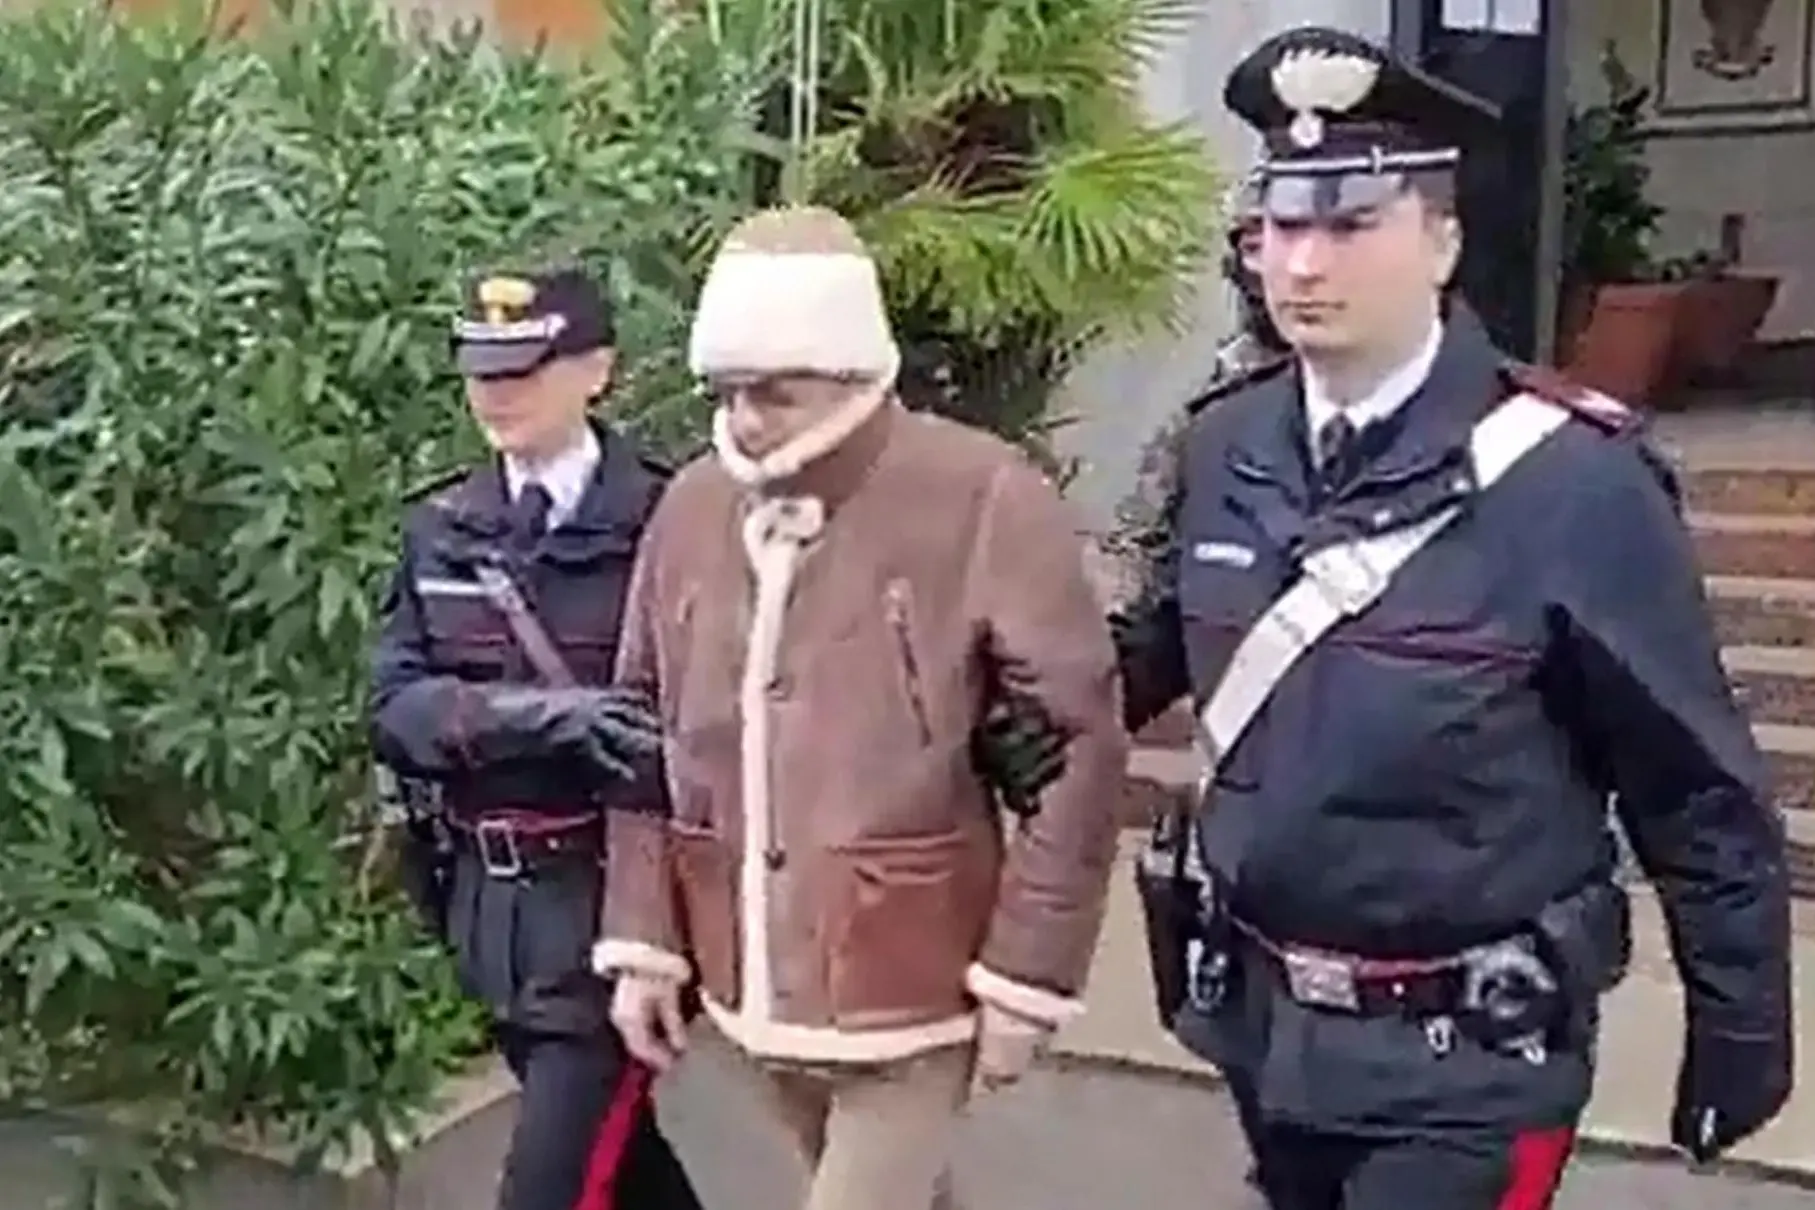 A handout photo made available by Italy's Carabinieri shows a video frame of the Mafia boss Matteo Messina Denaro (C), Italy's most wanted man, being arrested in Palermo, Sicily, by the Carabinieri police's ROS unit after 30 years on the run in Palermo, Sicily island, Italy, 16 January 2023. ANSA/US CARABINIERI +++ NO SALES, EDITORIAL USE ONLY +++ NPK +++